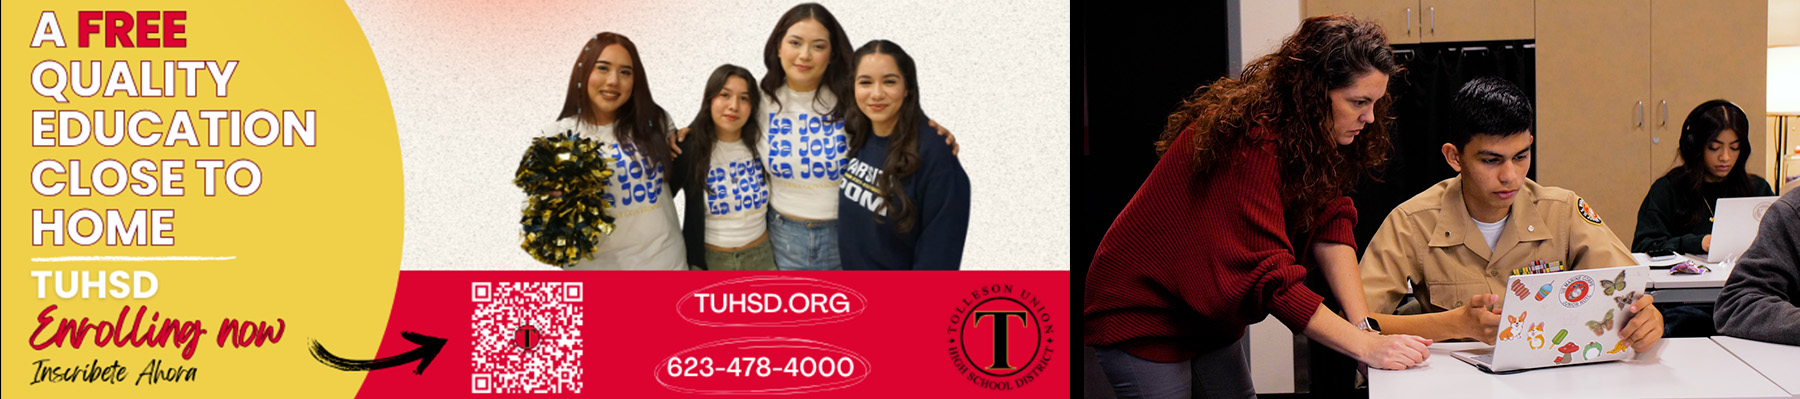 A free quality education close to home - TUHSD Enrolling now | Inscribete Ahora - tuhsd.org - 623-478-4000| Teacher assisting student with laptop